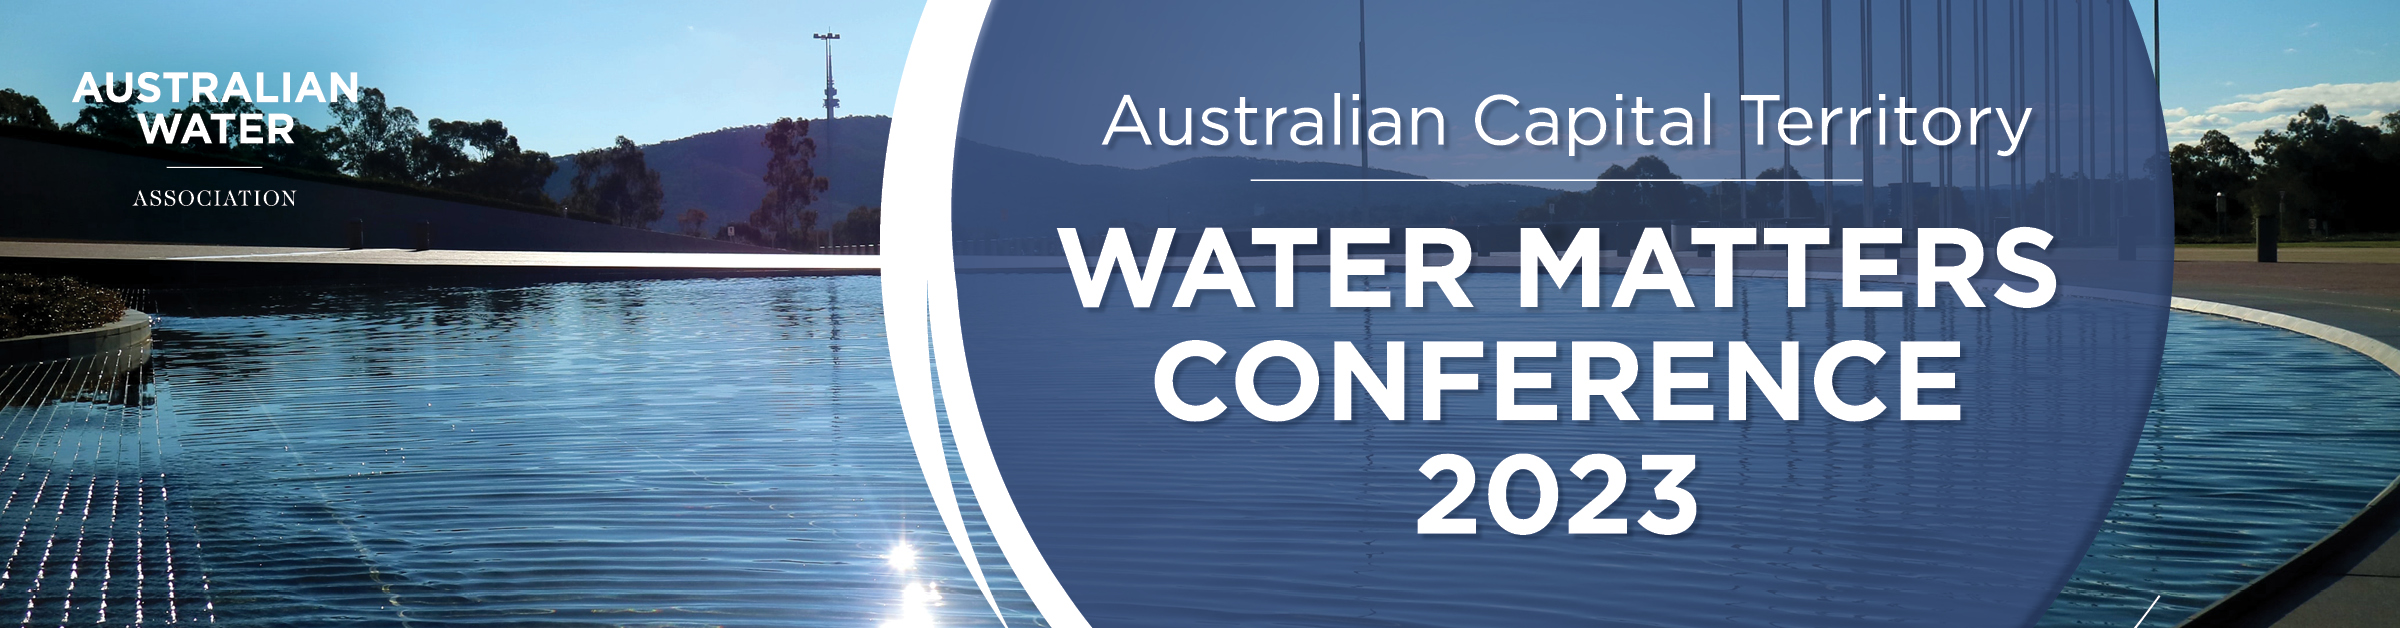 ACT Water Matters Conference 2023_HubSpot Event Banner 1200x314px